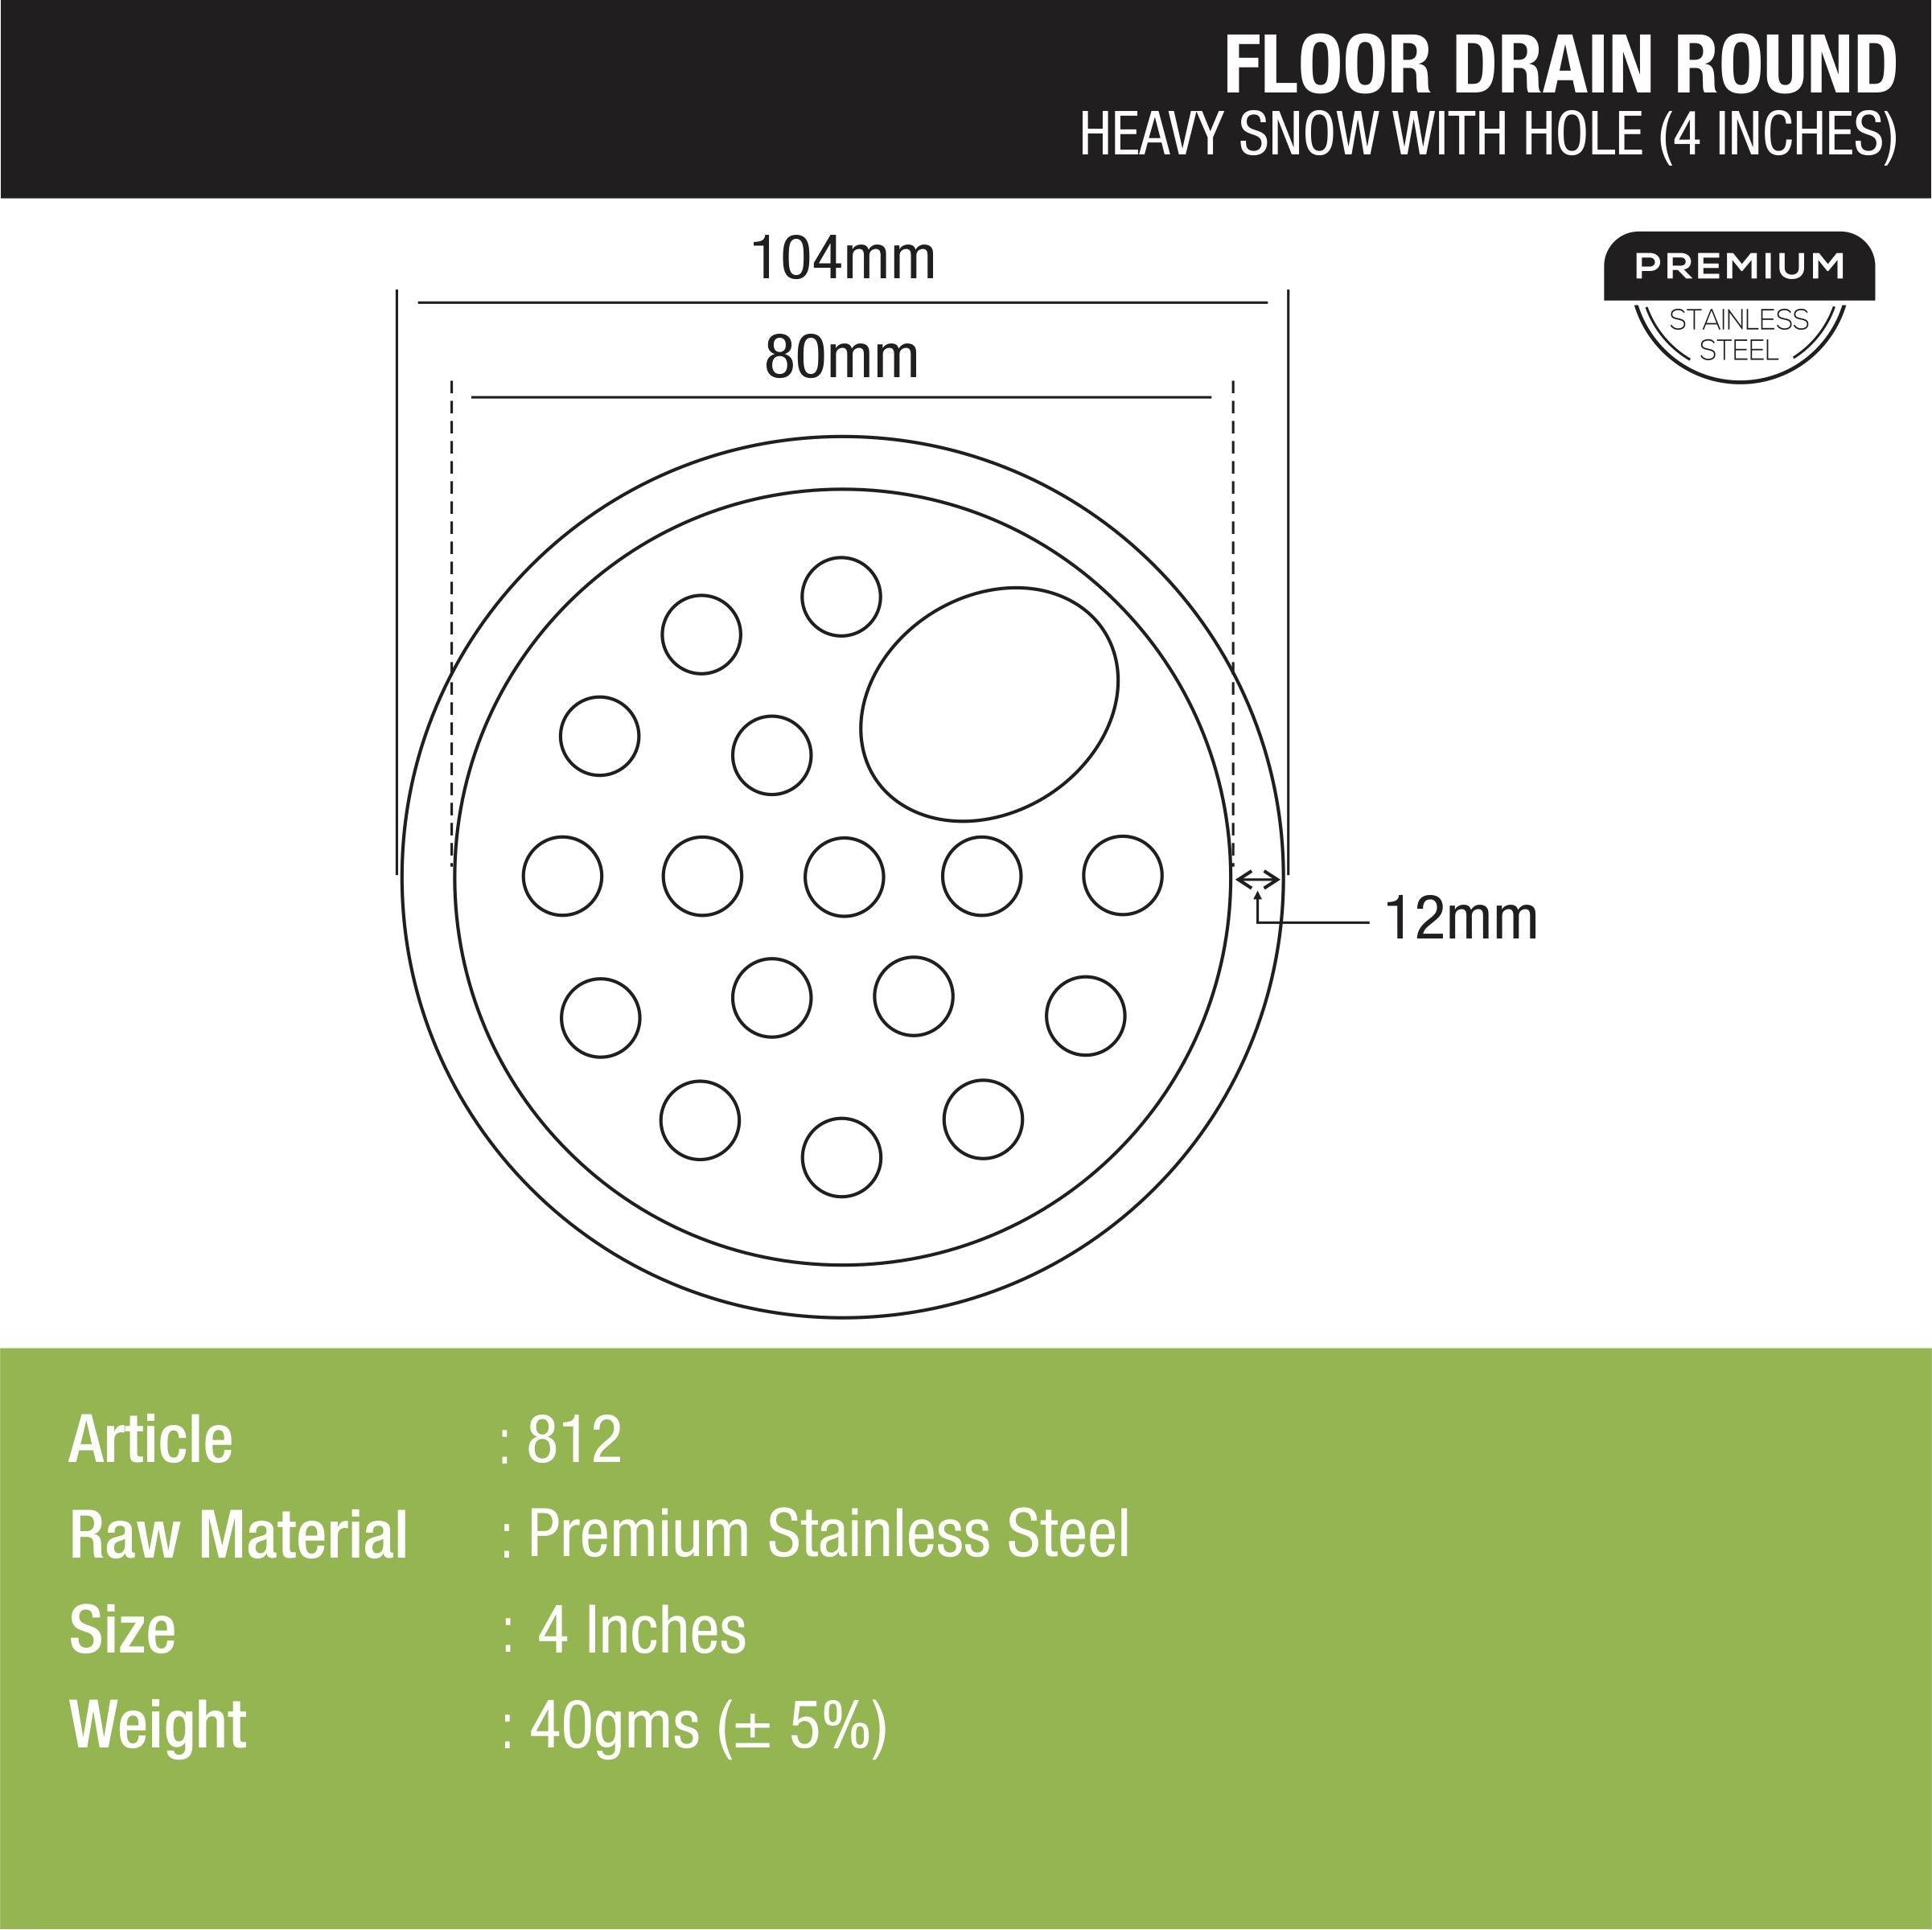 Heavy Snow Round Floor Drain with Hole (4 inches) dimensions and sizes